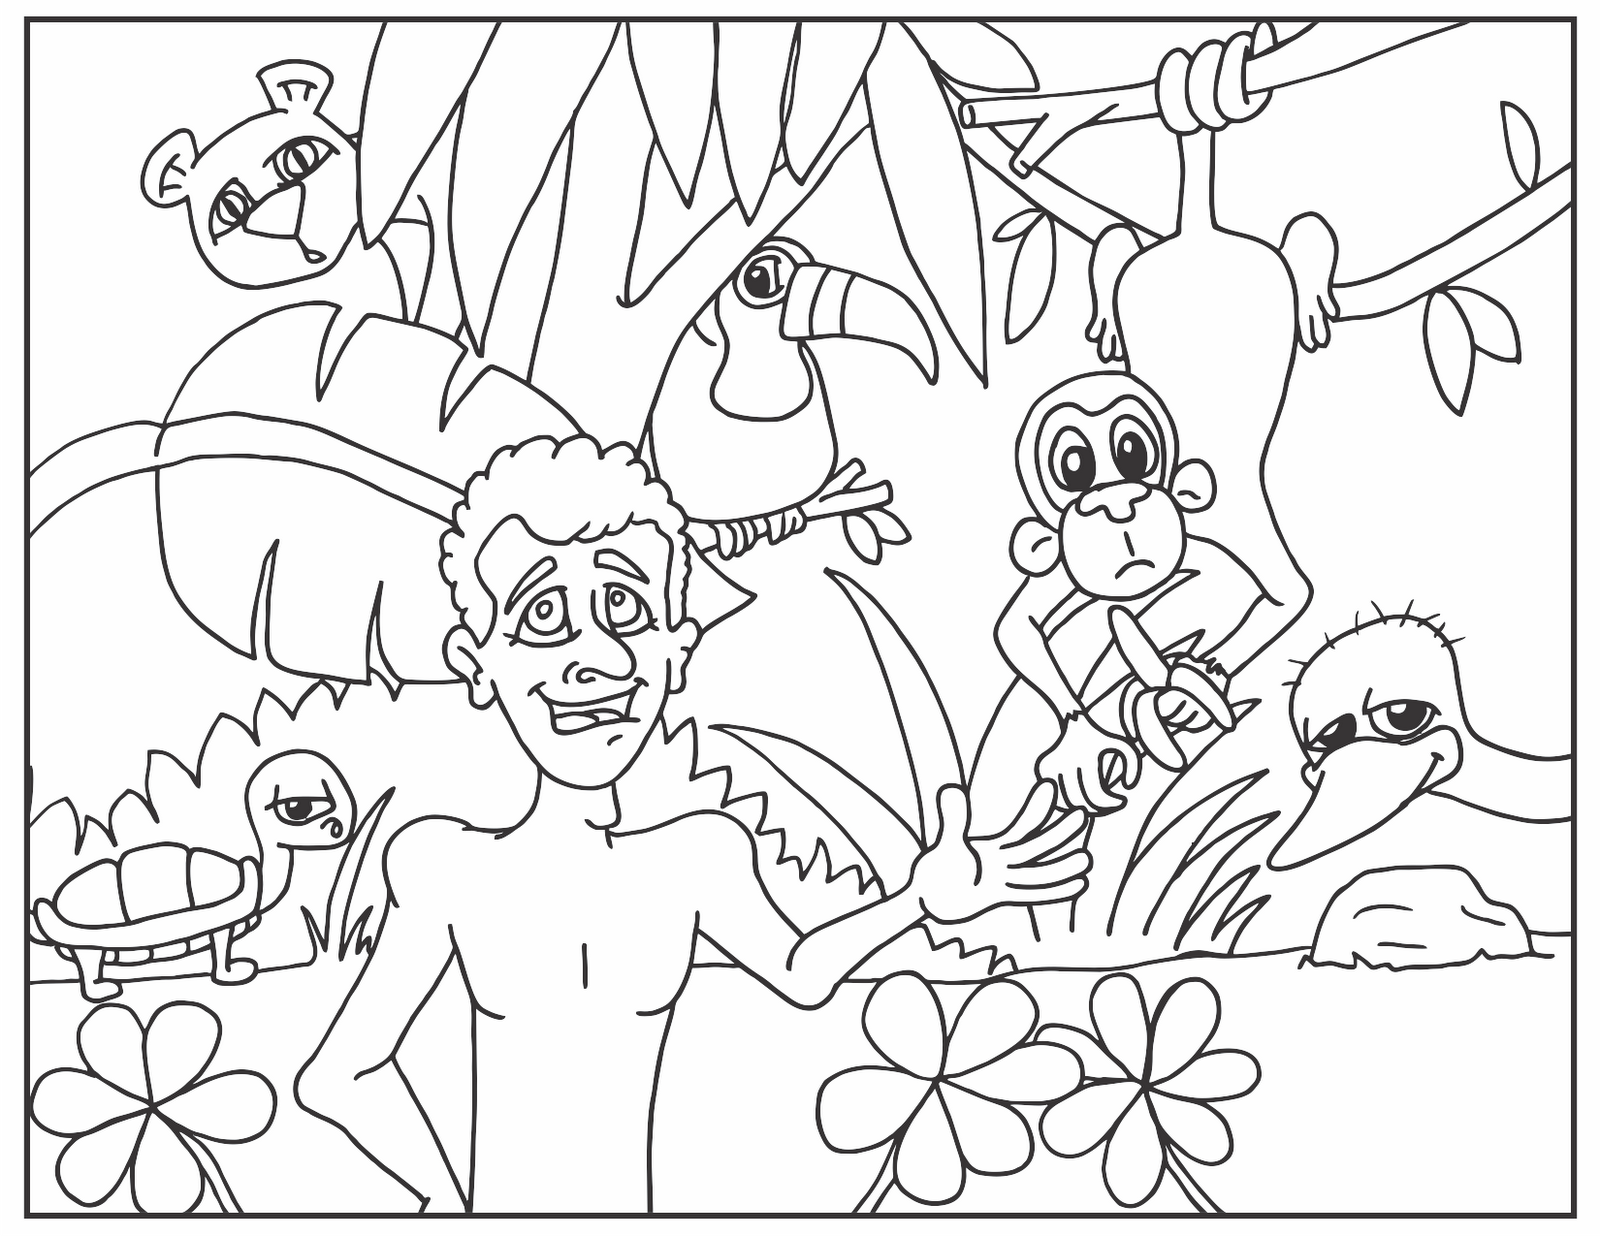 Matt's Sketch Pad: Coloring Pages for New Curriculum